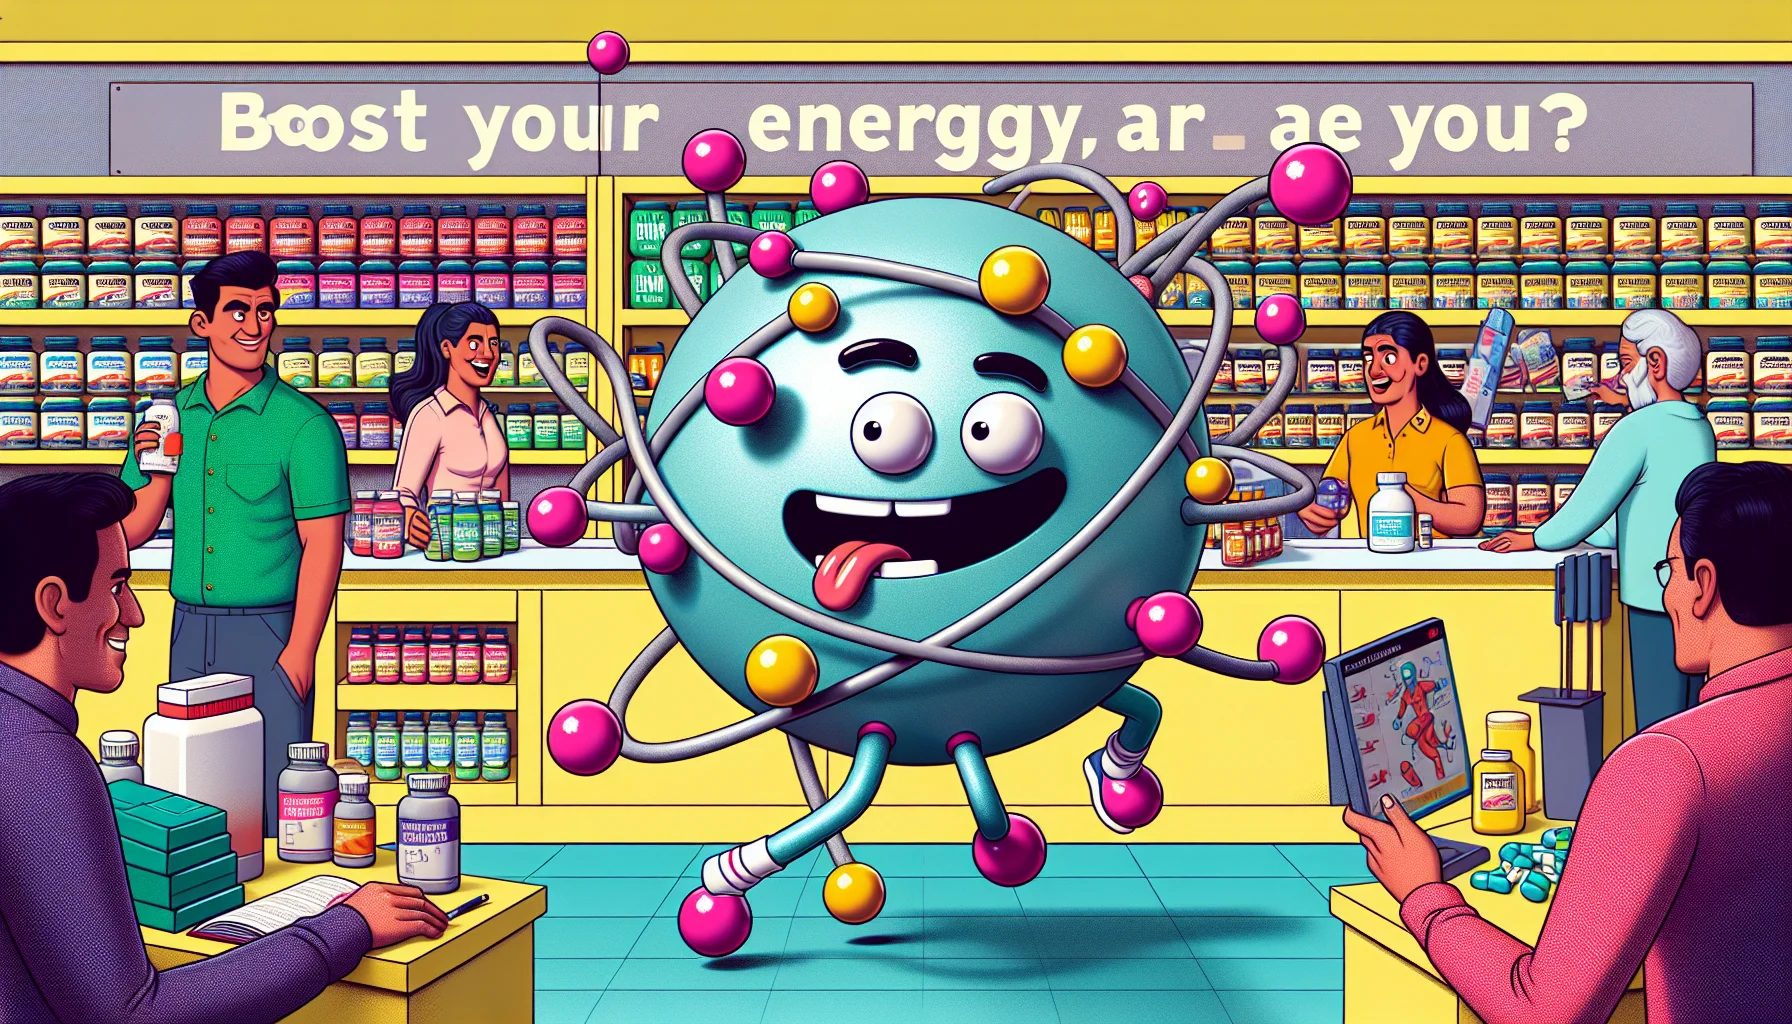 A quirkily illustrated image of a magnesium atom, prominently showing its twelve protons in the nucleus and twelve electrons orbiting around it. Specifically, notice the two valence electrons in its outer shell symbolizing magnesium's common readiness to give up those electrons in chemical reactions. These electrons are animated in a playful way, as if they're ready to jump off and race each other. The background comprises a lively sports supplement shop with a diverse range of customers - a Middle-Eastern woman choosing protein powders, a Caucasian man examining vitamin bottles, and a South Asian teenager looking at energy bars. A banner overhead reads, 'Boost your energy with Magnesium - it's ready to race, are you?'